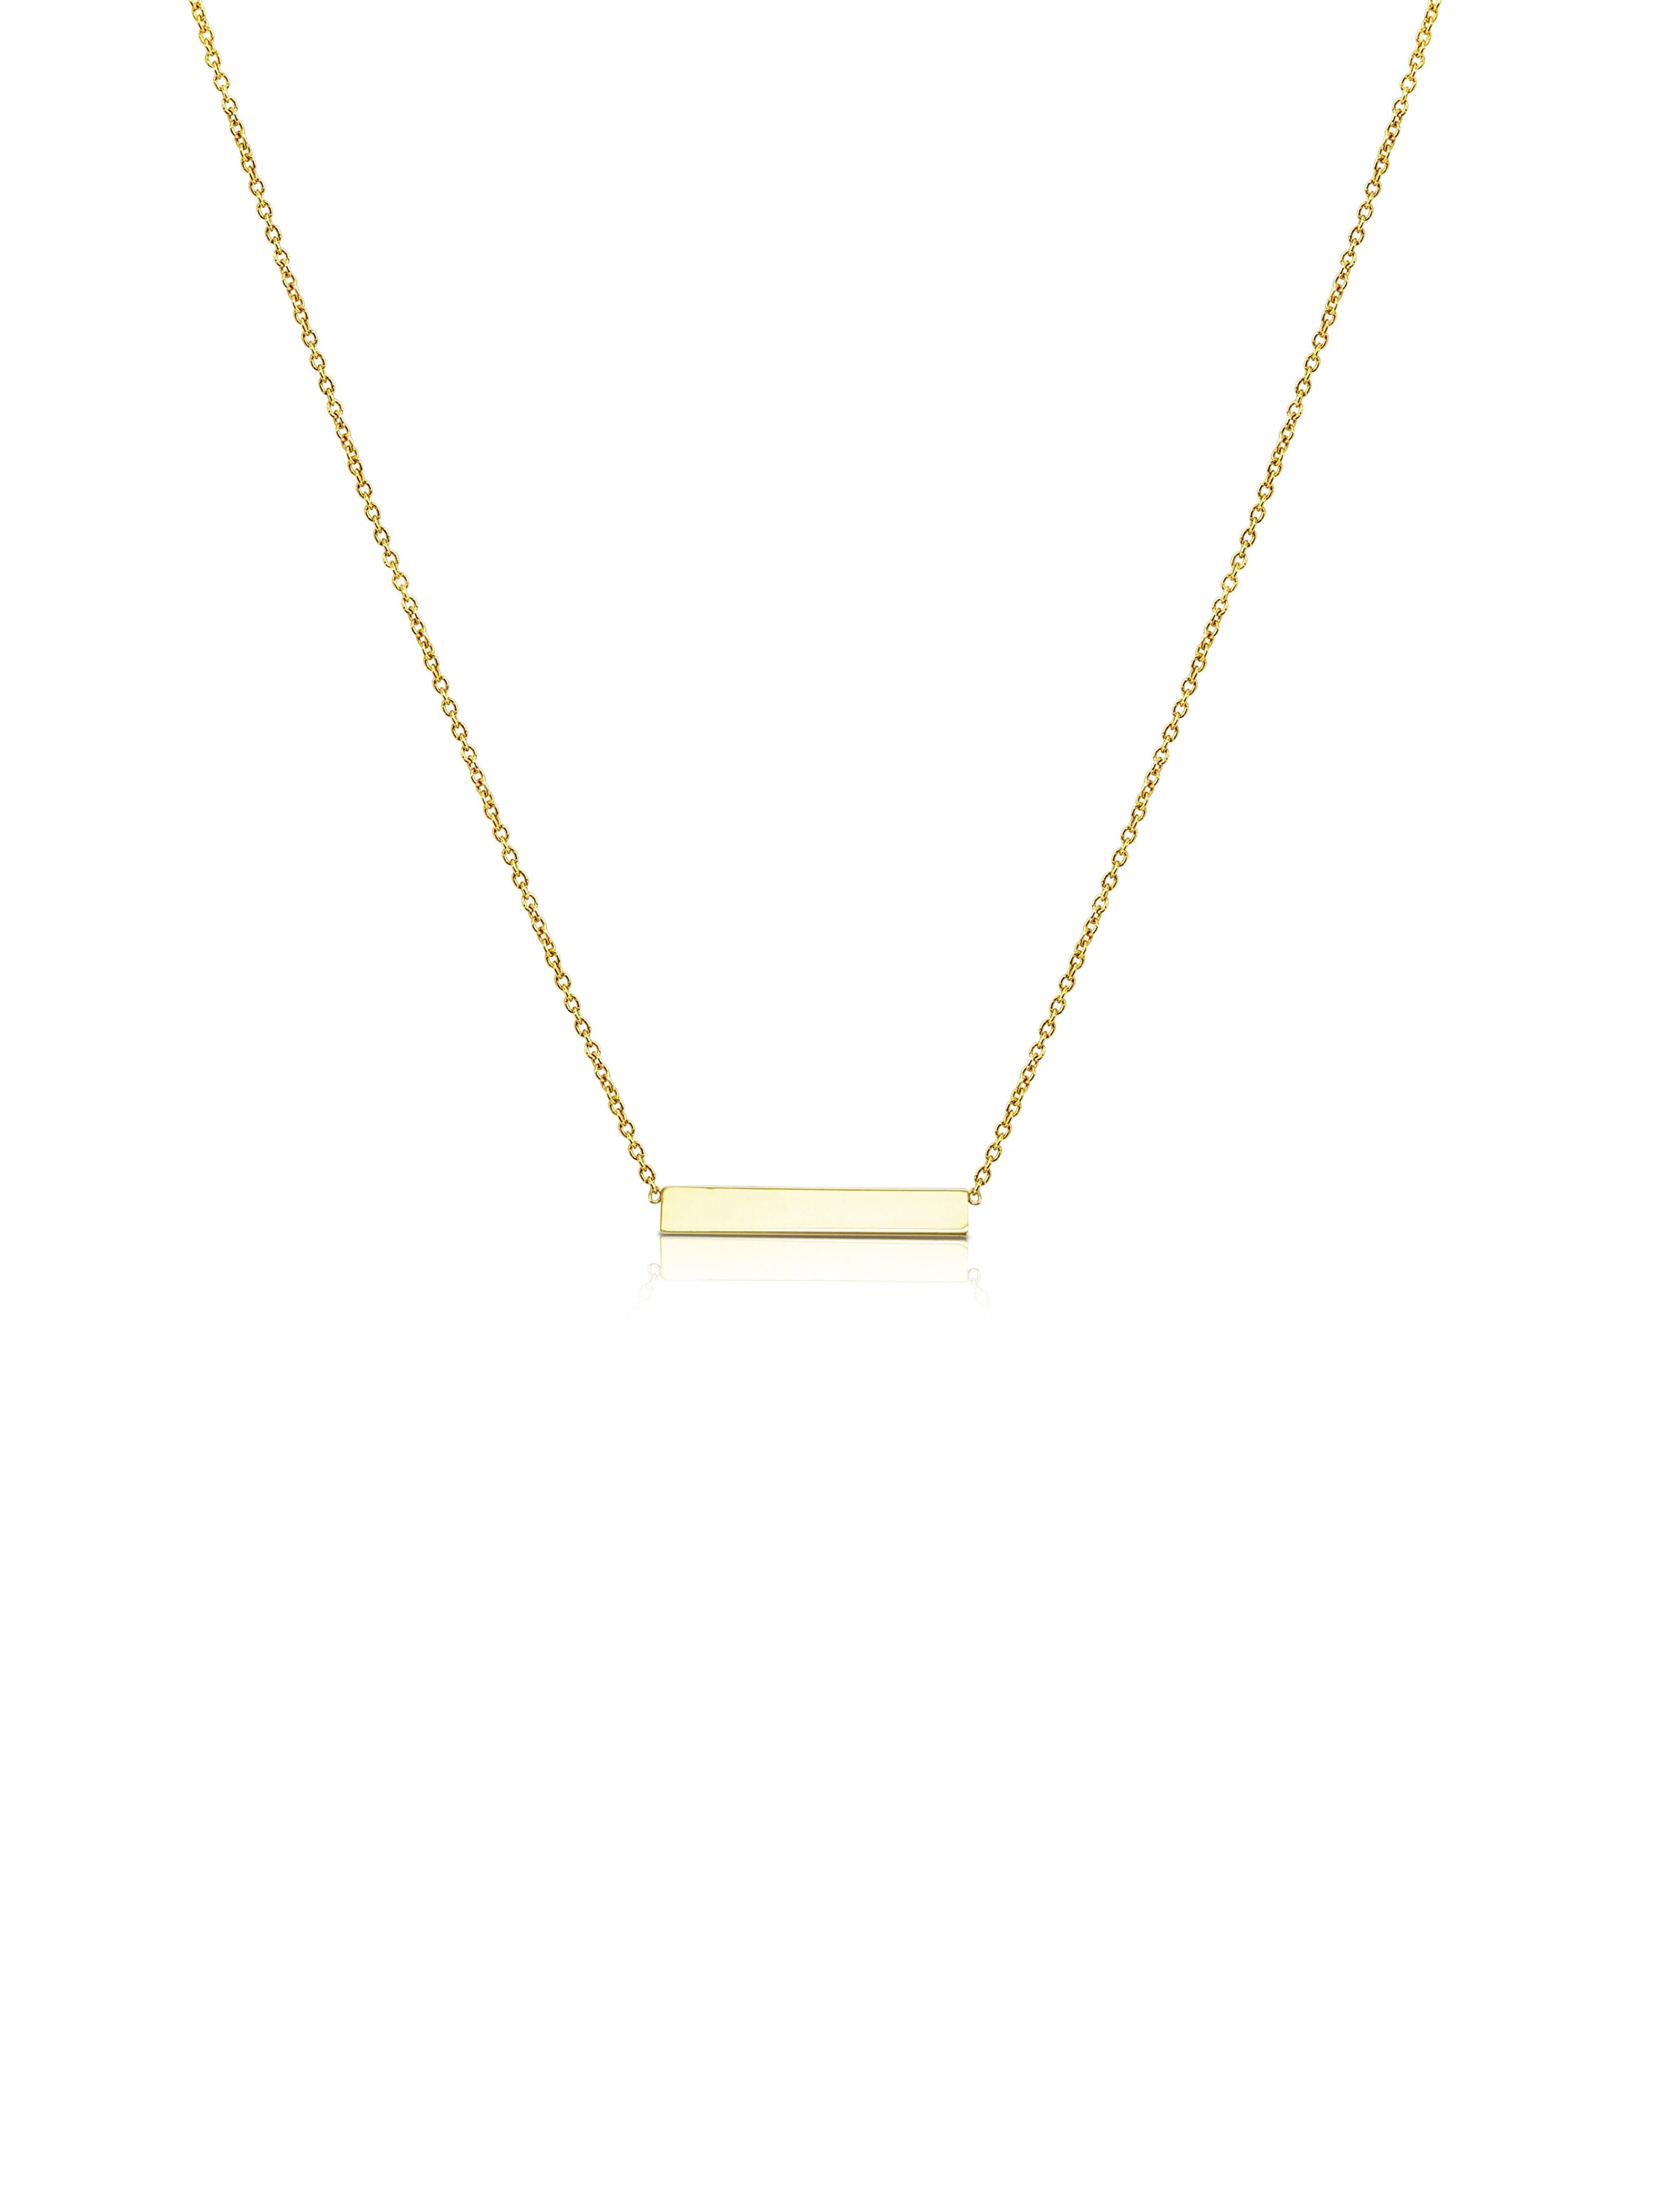 Ór Collection 9ct Yellow Gold Bar Necklace